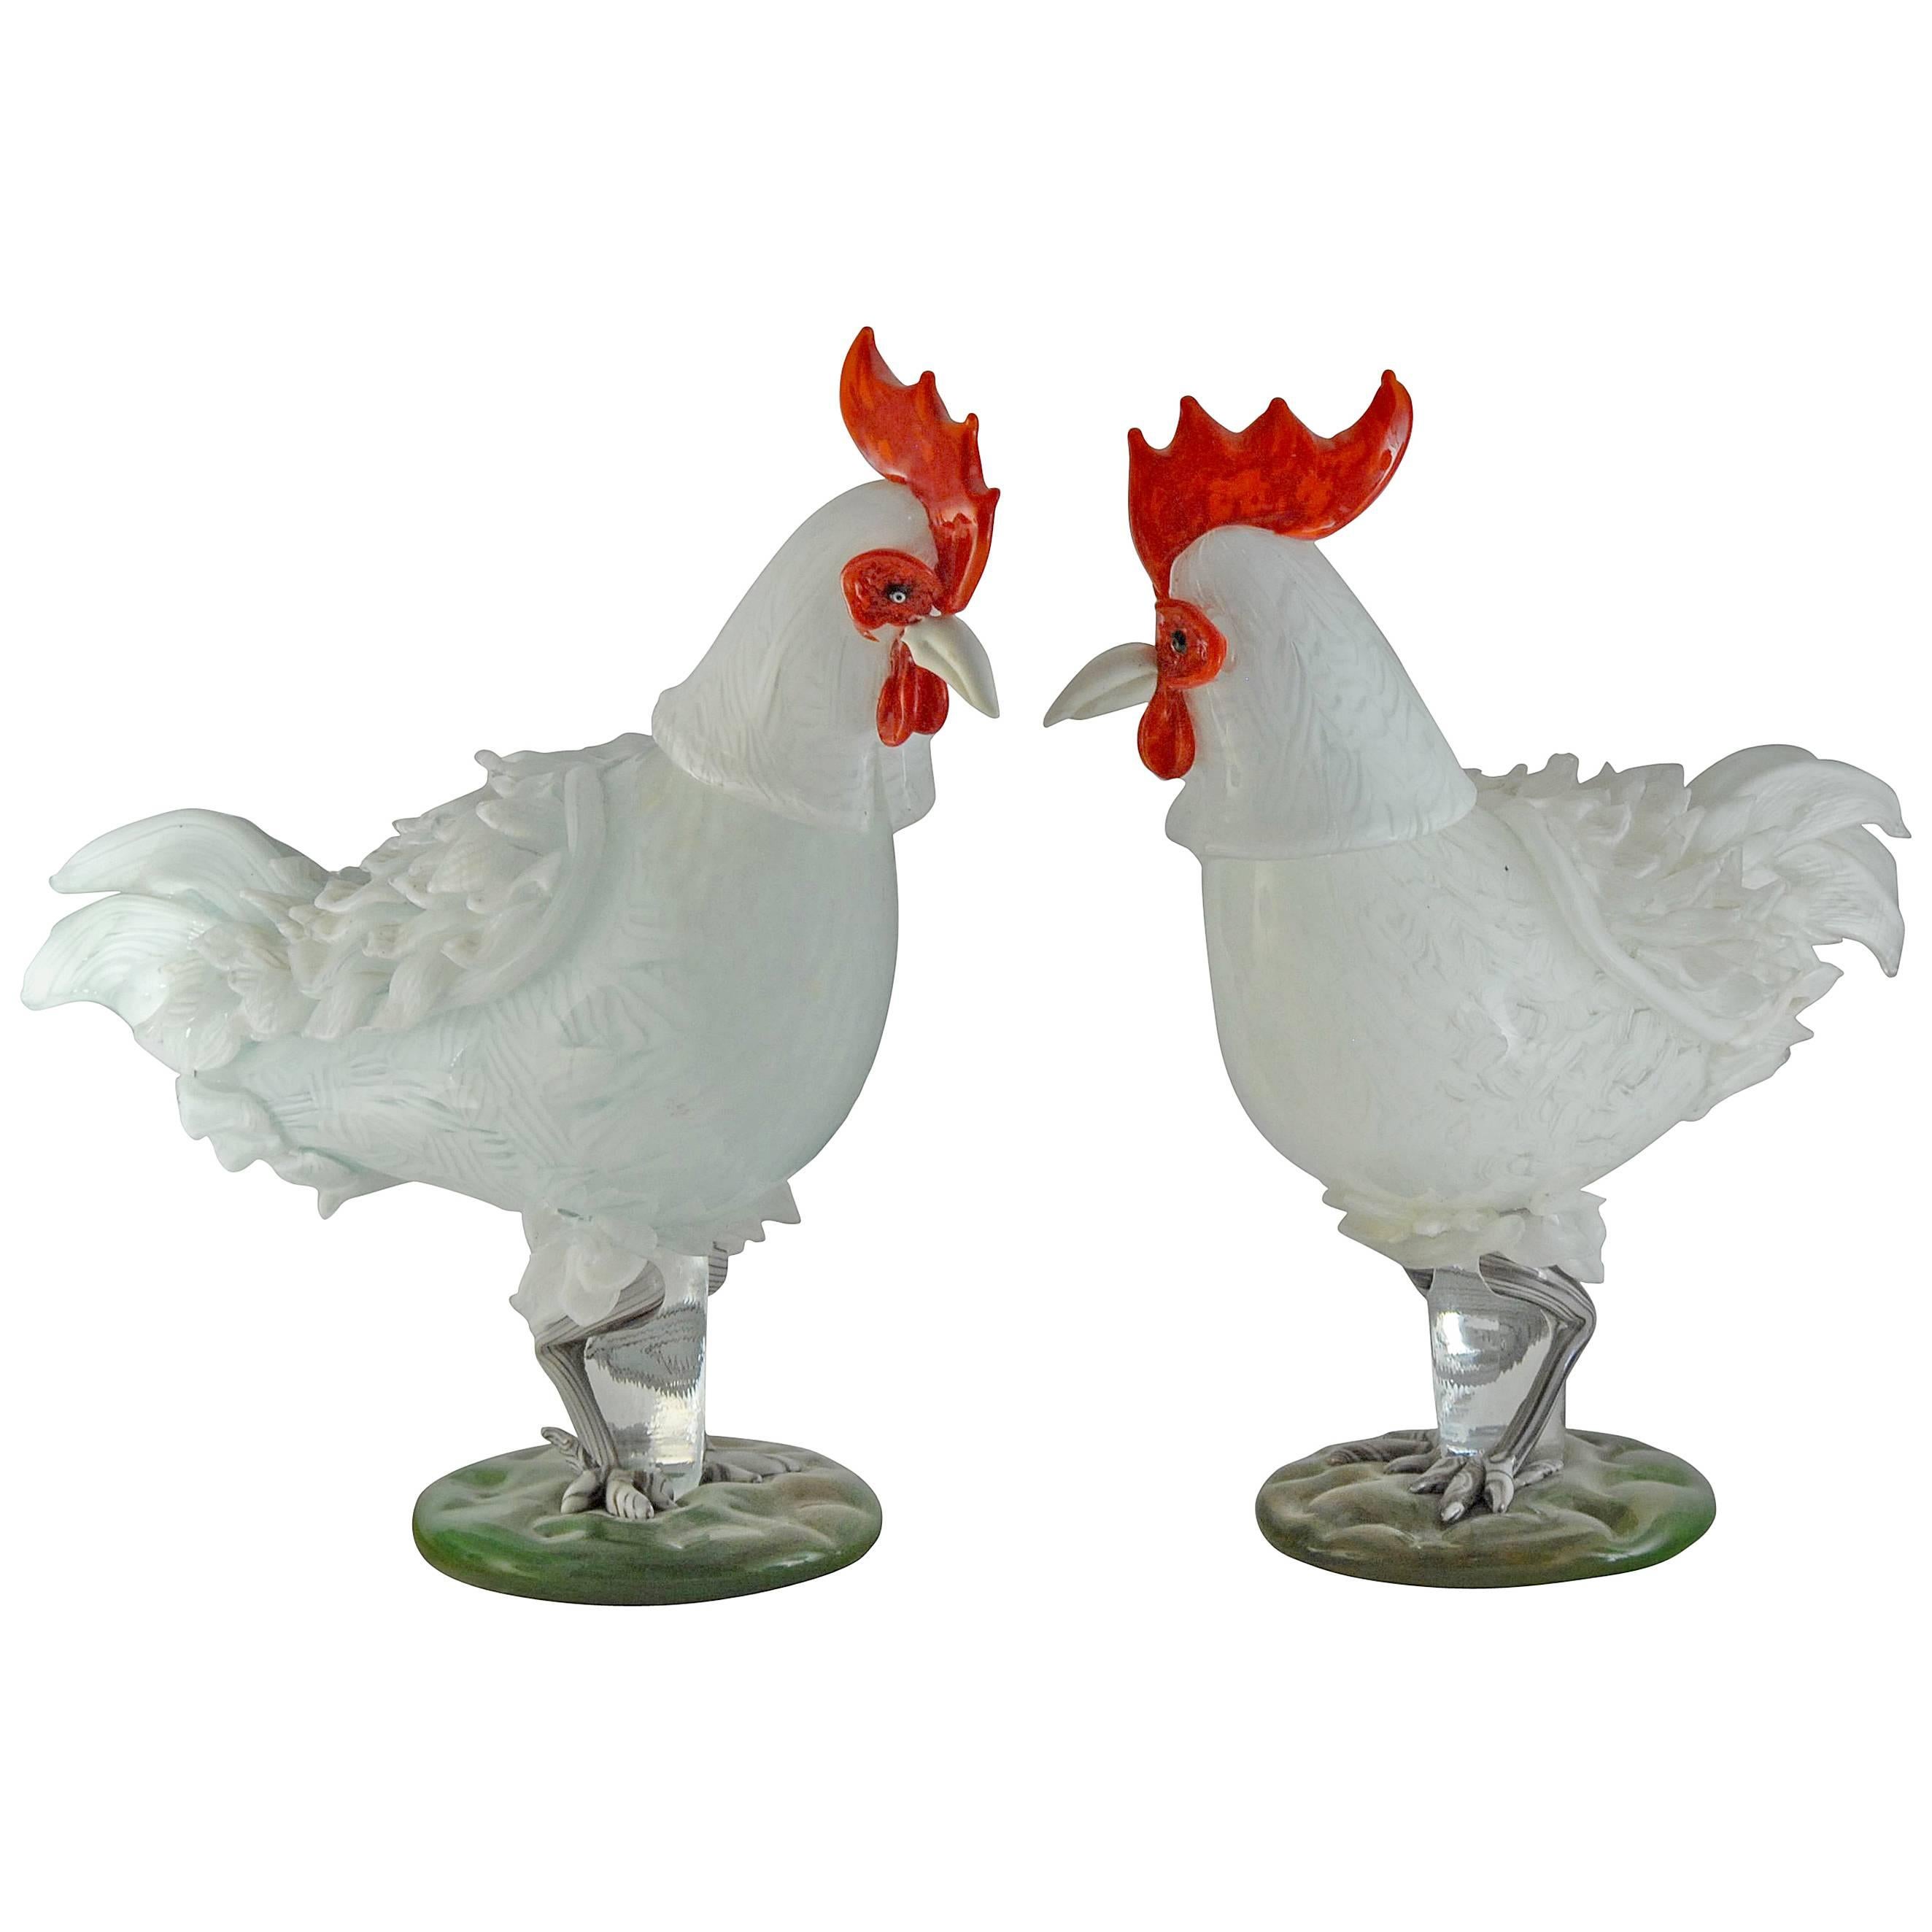 Luciano Ferro for Avem, 1958-62, Two Large White Roosters